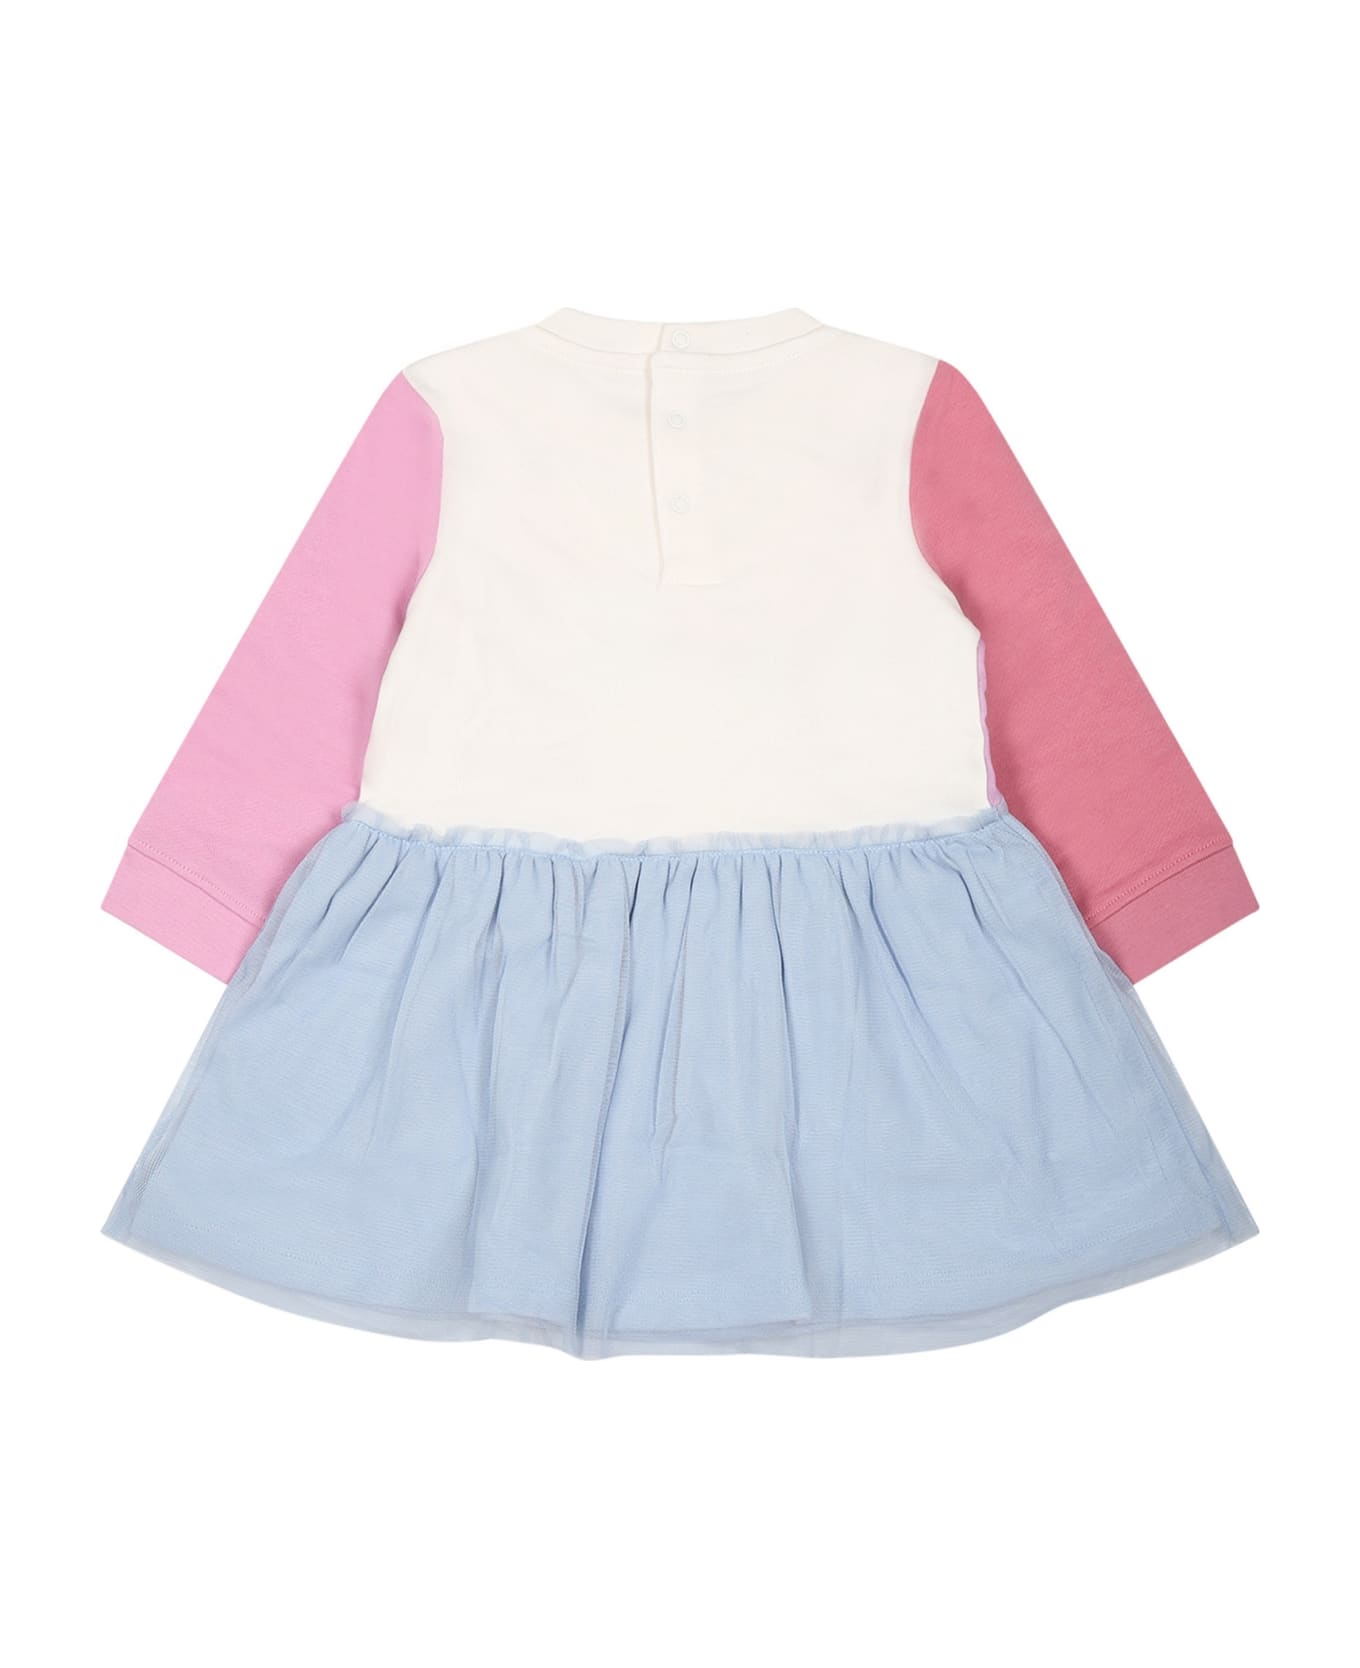 Stella McCartney Kids Multicolor Dress For Baby Girl With Unicorns - Multicolor